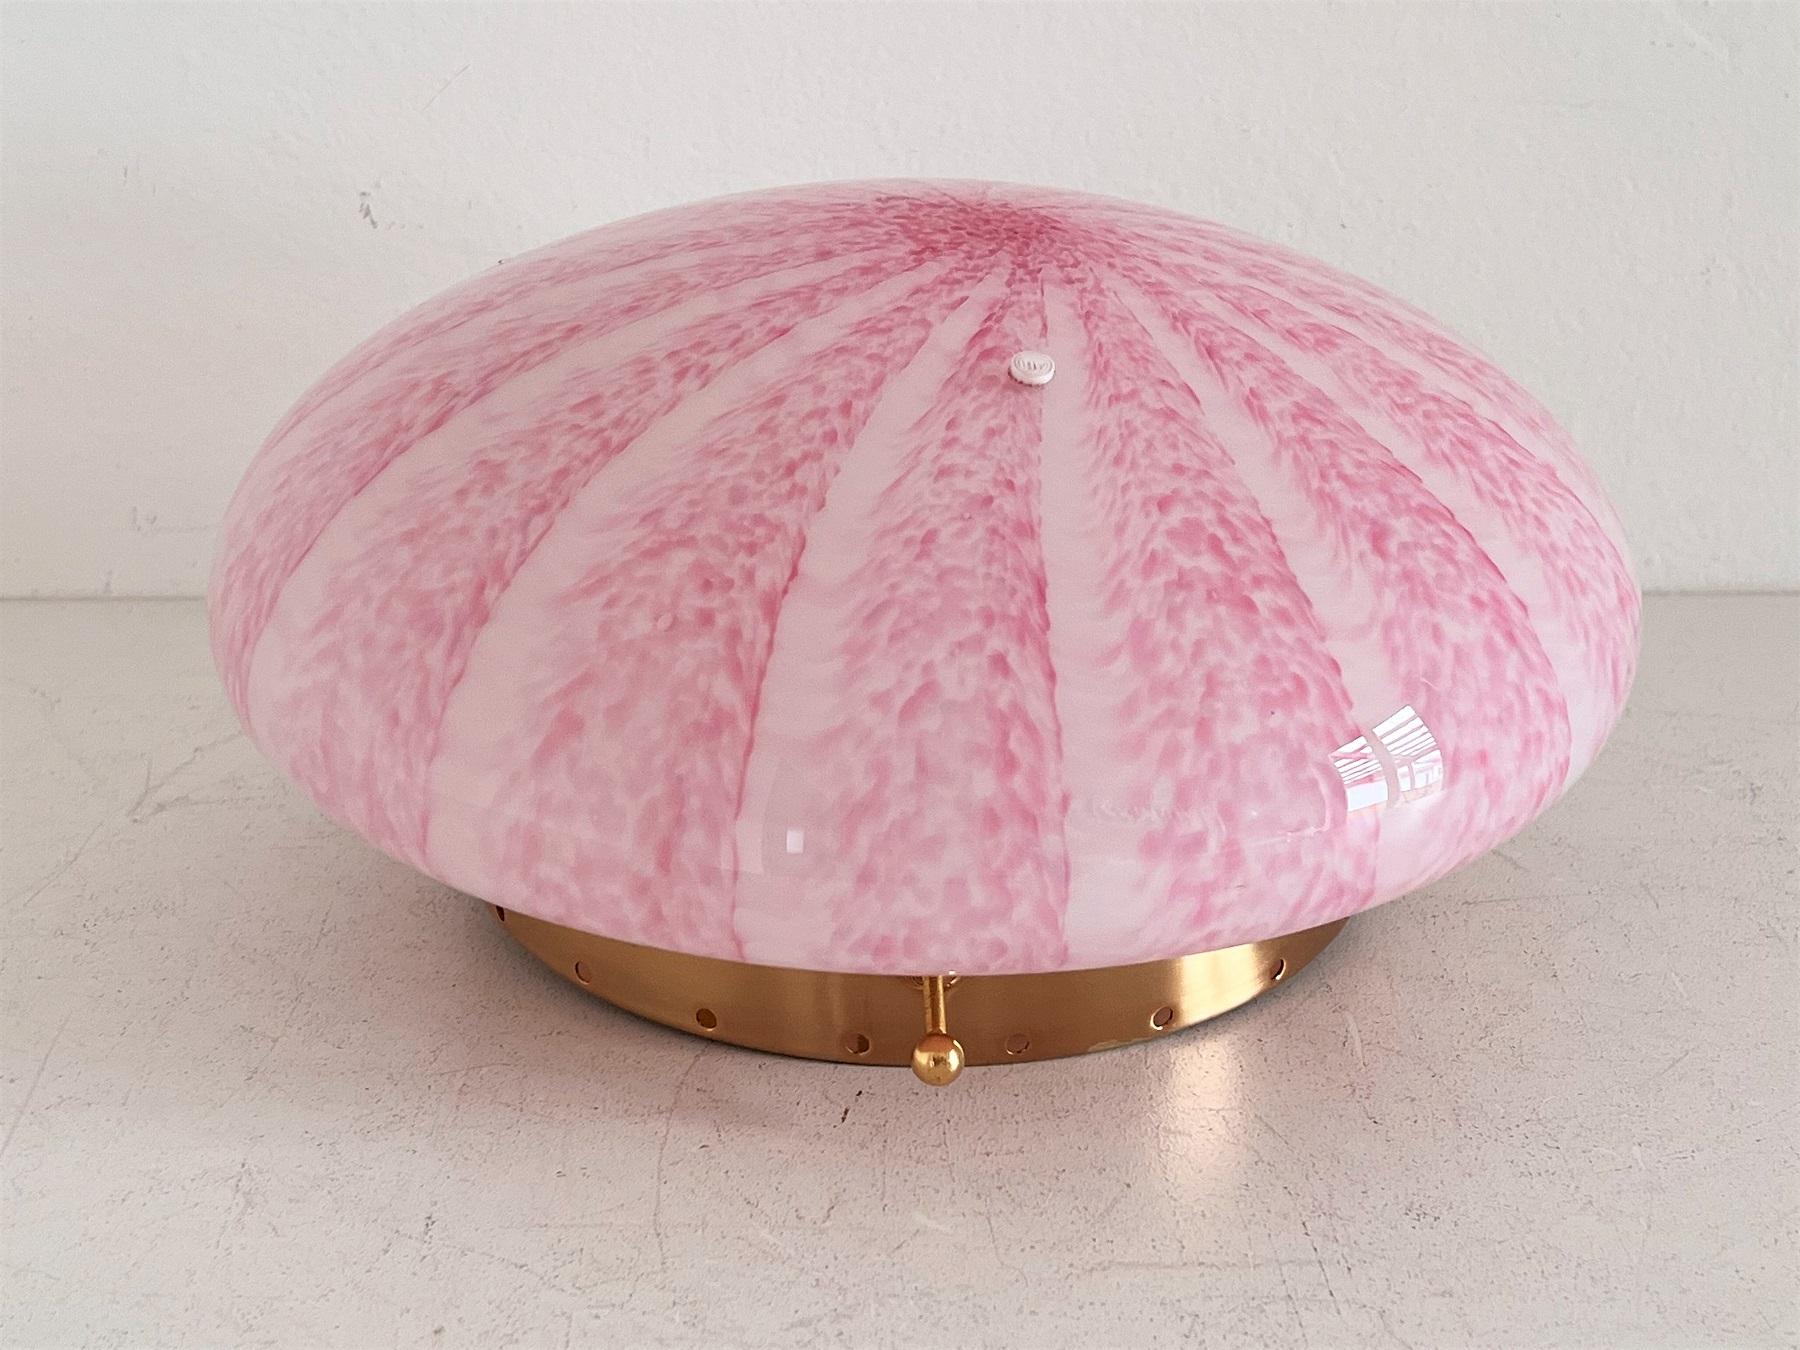 Gorgeous flush mount light or wall sconce produced from La Murrina, Murano, Italy in the 1970s.
With original manufacturers glass stamp.
The beautiful Murano glass is made in pink with stunning decor which leaves nice effects especially when